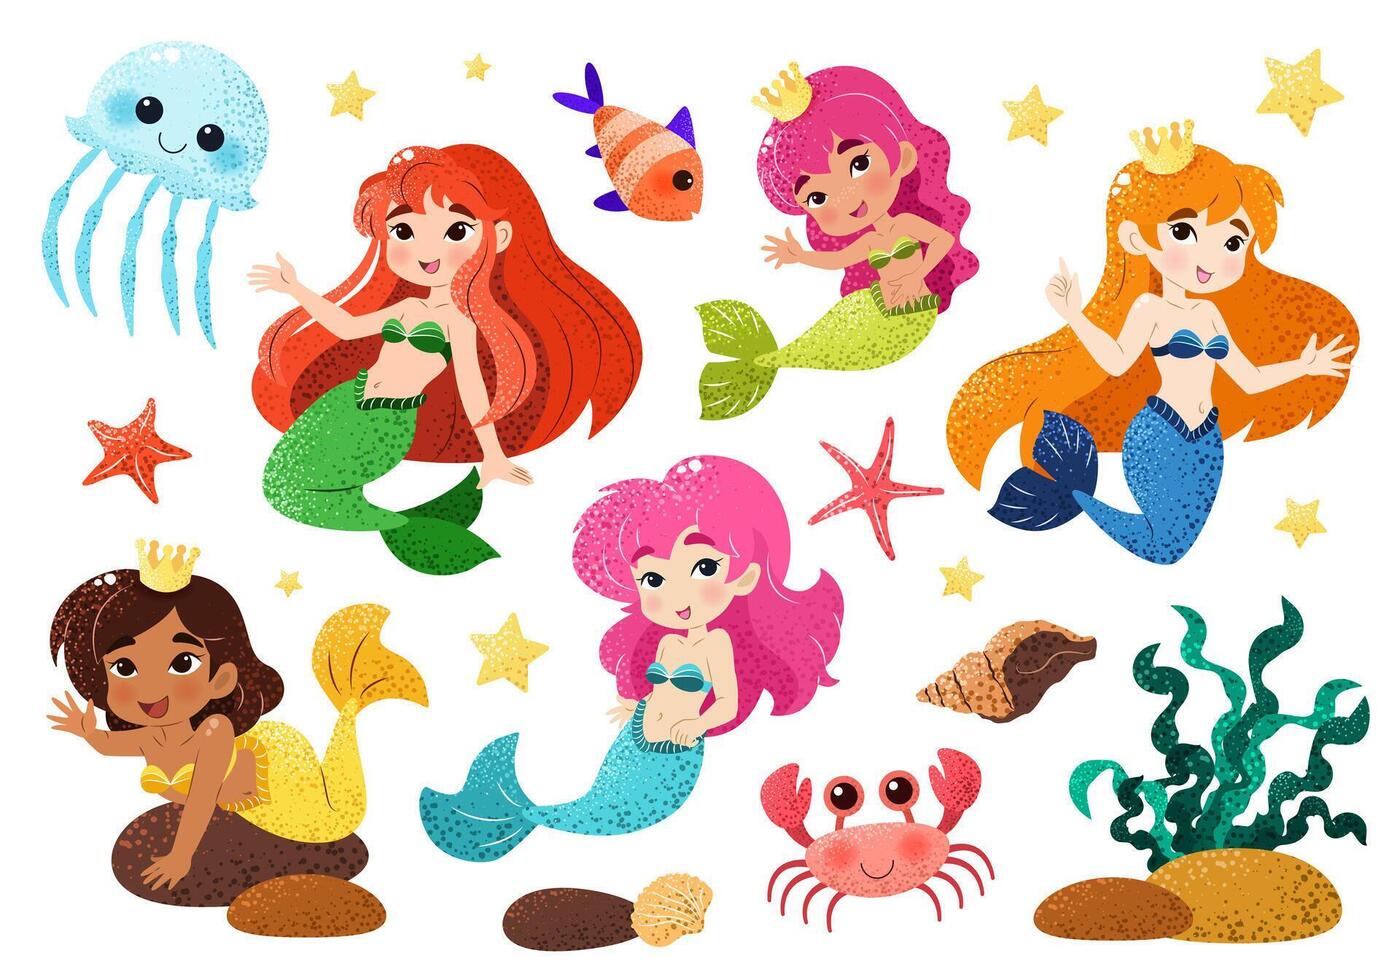 Bundle with kawaii mermaids, marine animals and plants. Isolated illustrations on white background with magical creatures for a childish print. Vector clip art. Underwater set of princesses. Sea life.